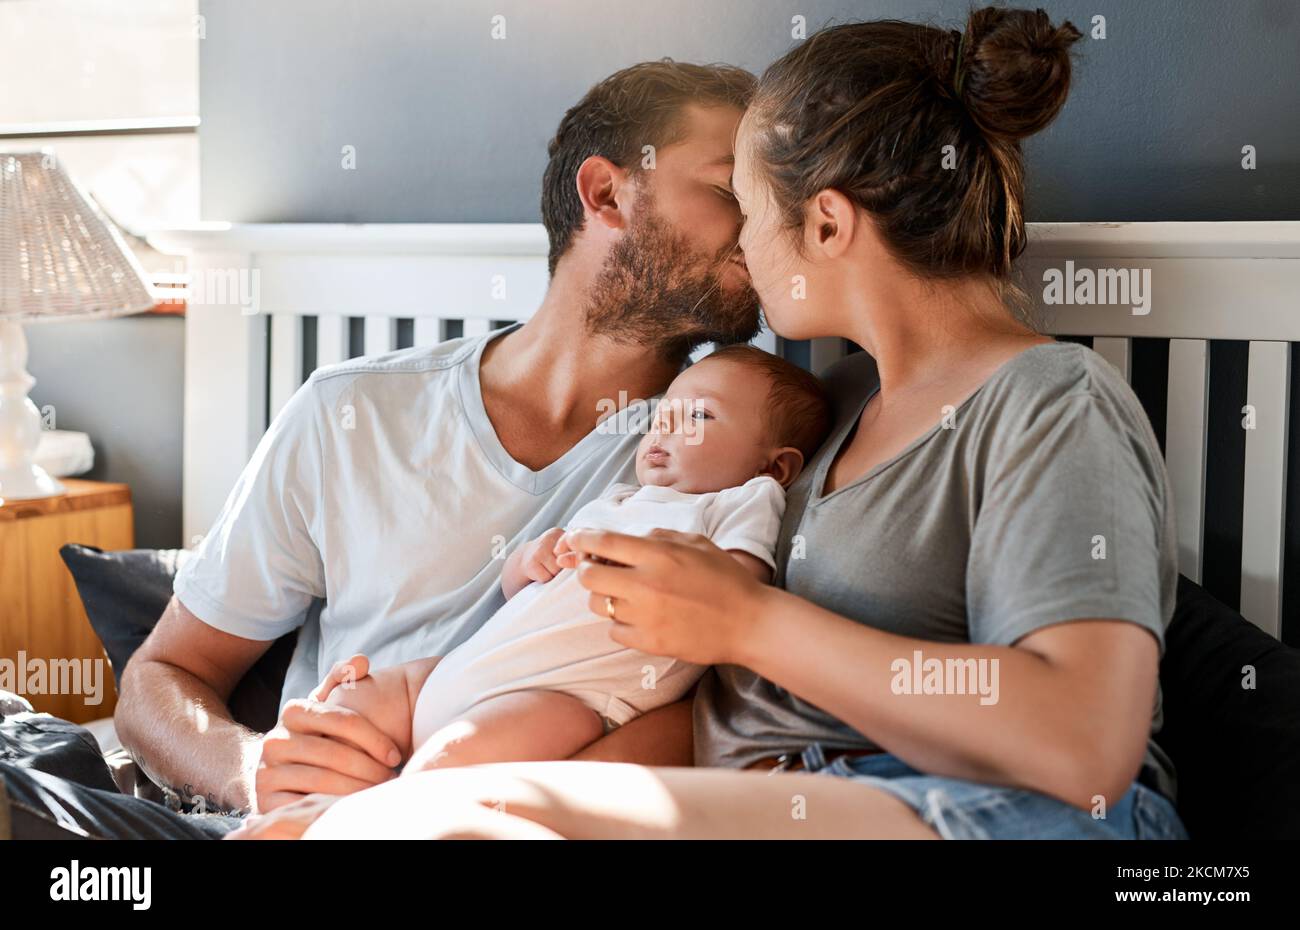 Hell be raised in a home of love. a young mother and father bonding with their newborn baby boy in the bedroom. Stock Photo